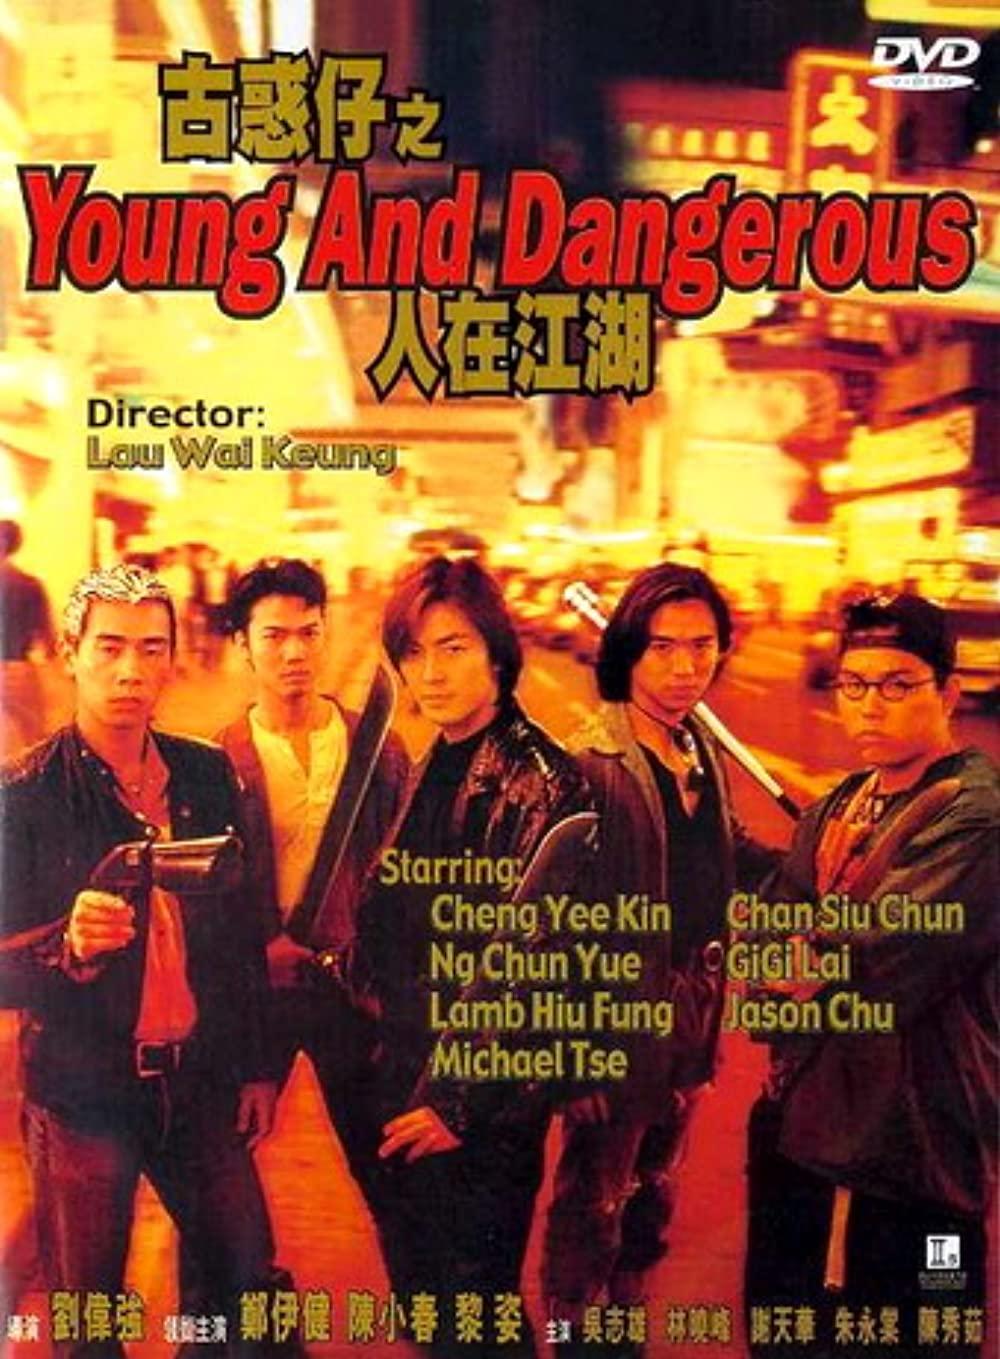 1. YOUNG AND DANGEROUS